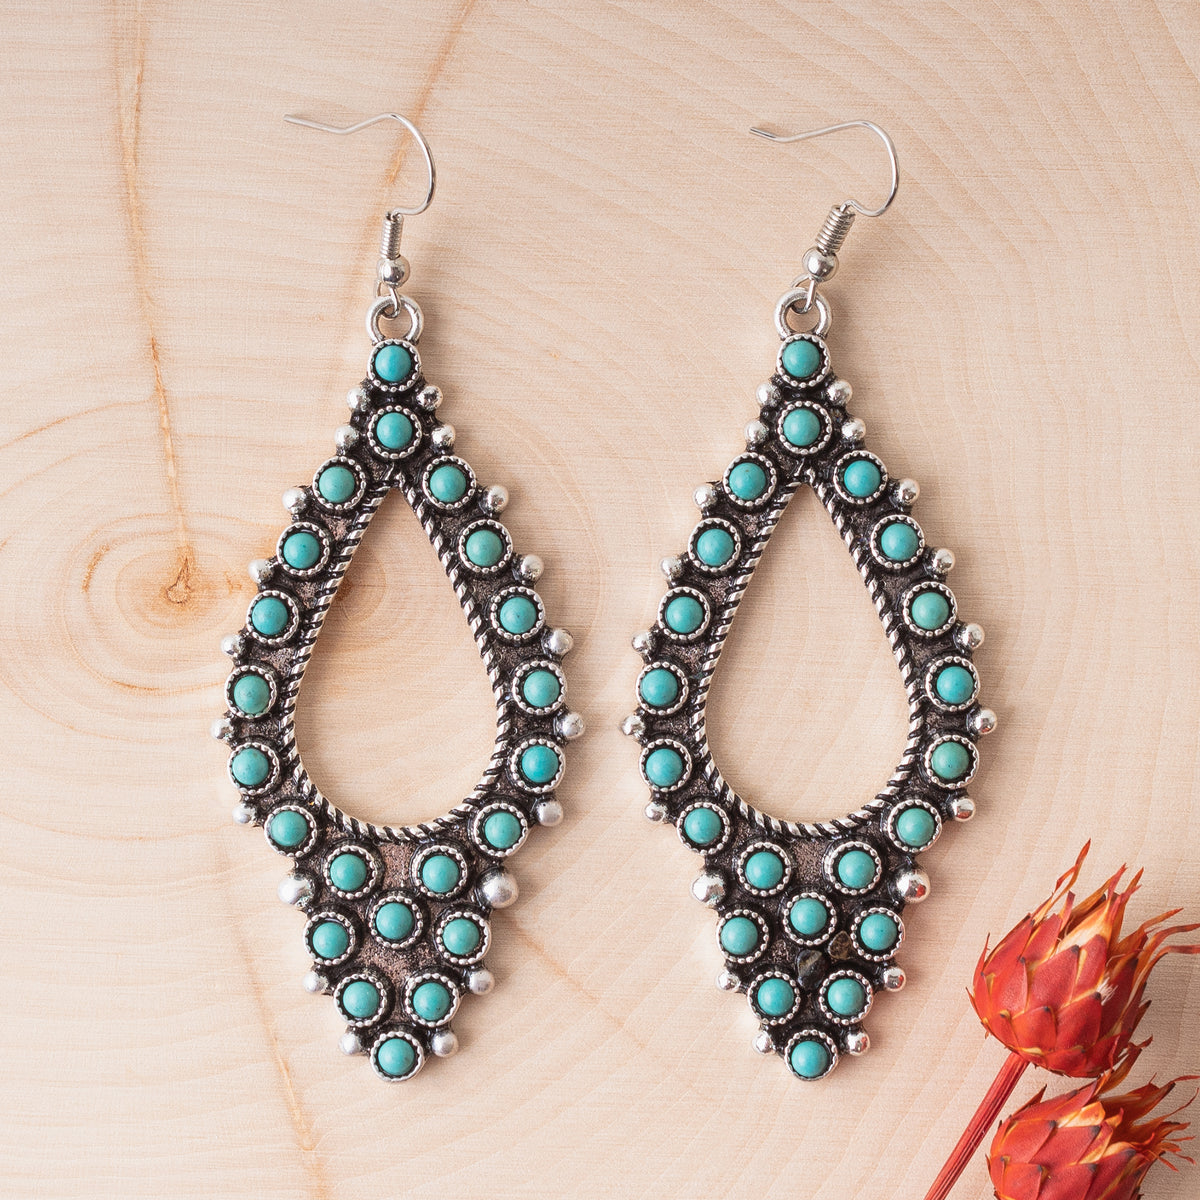 93065 - Western Earrings - Turquoise and Silver